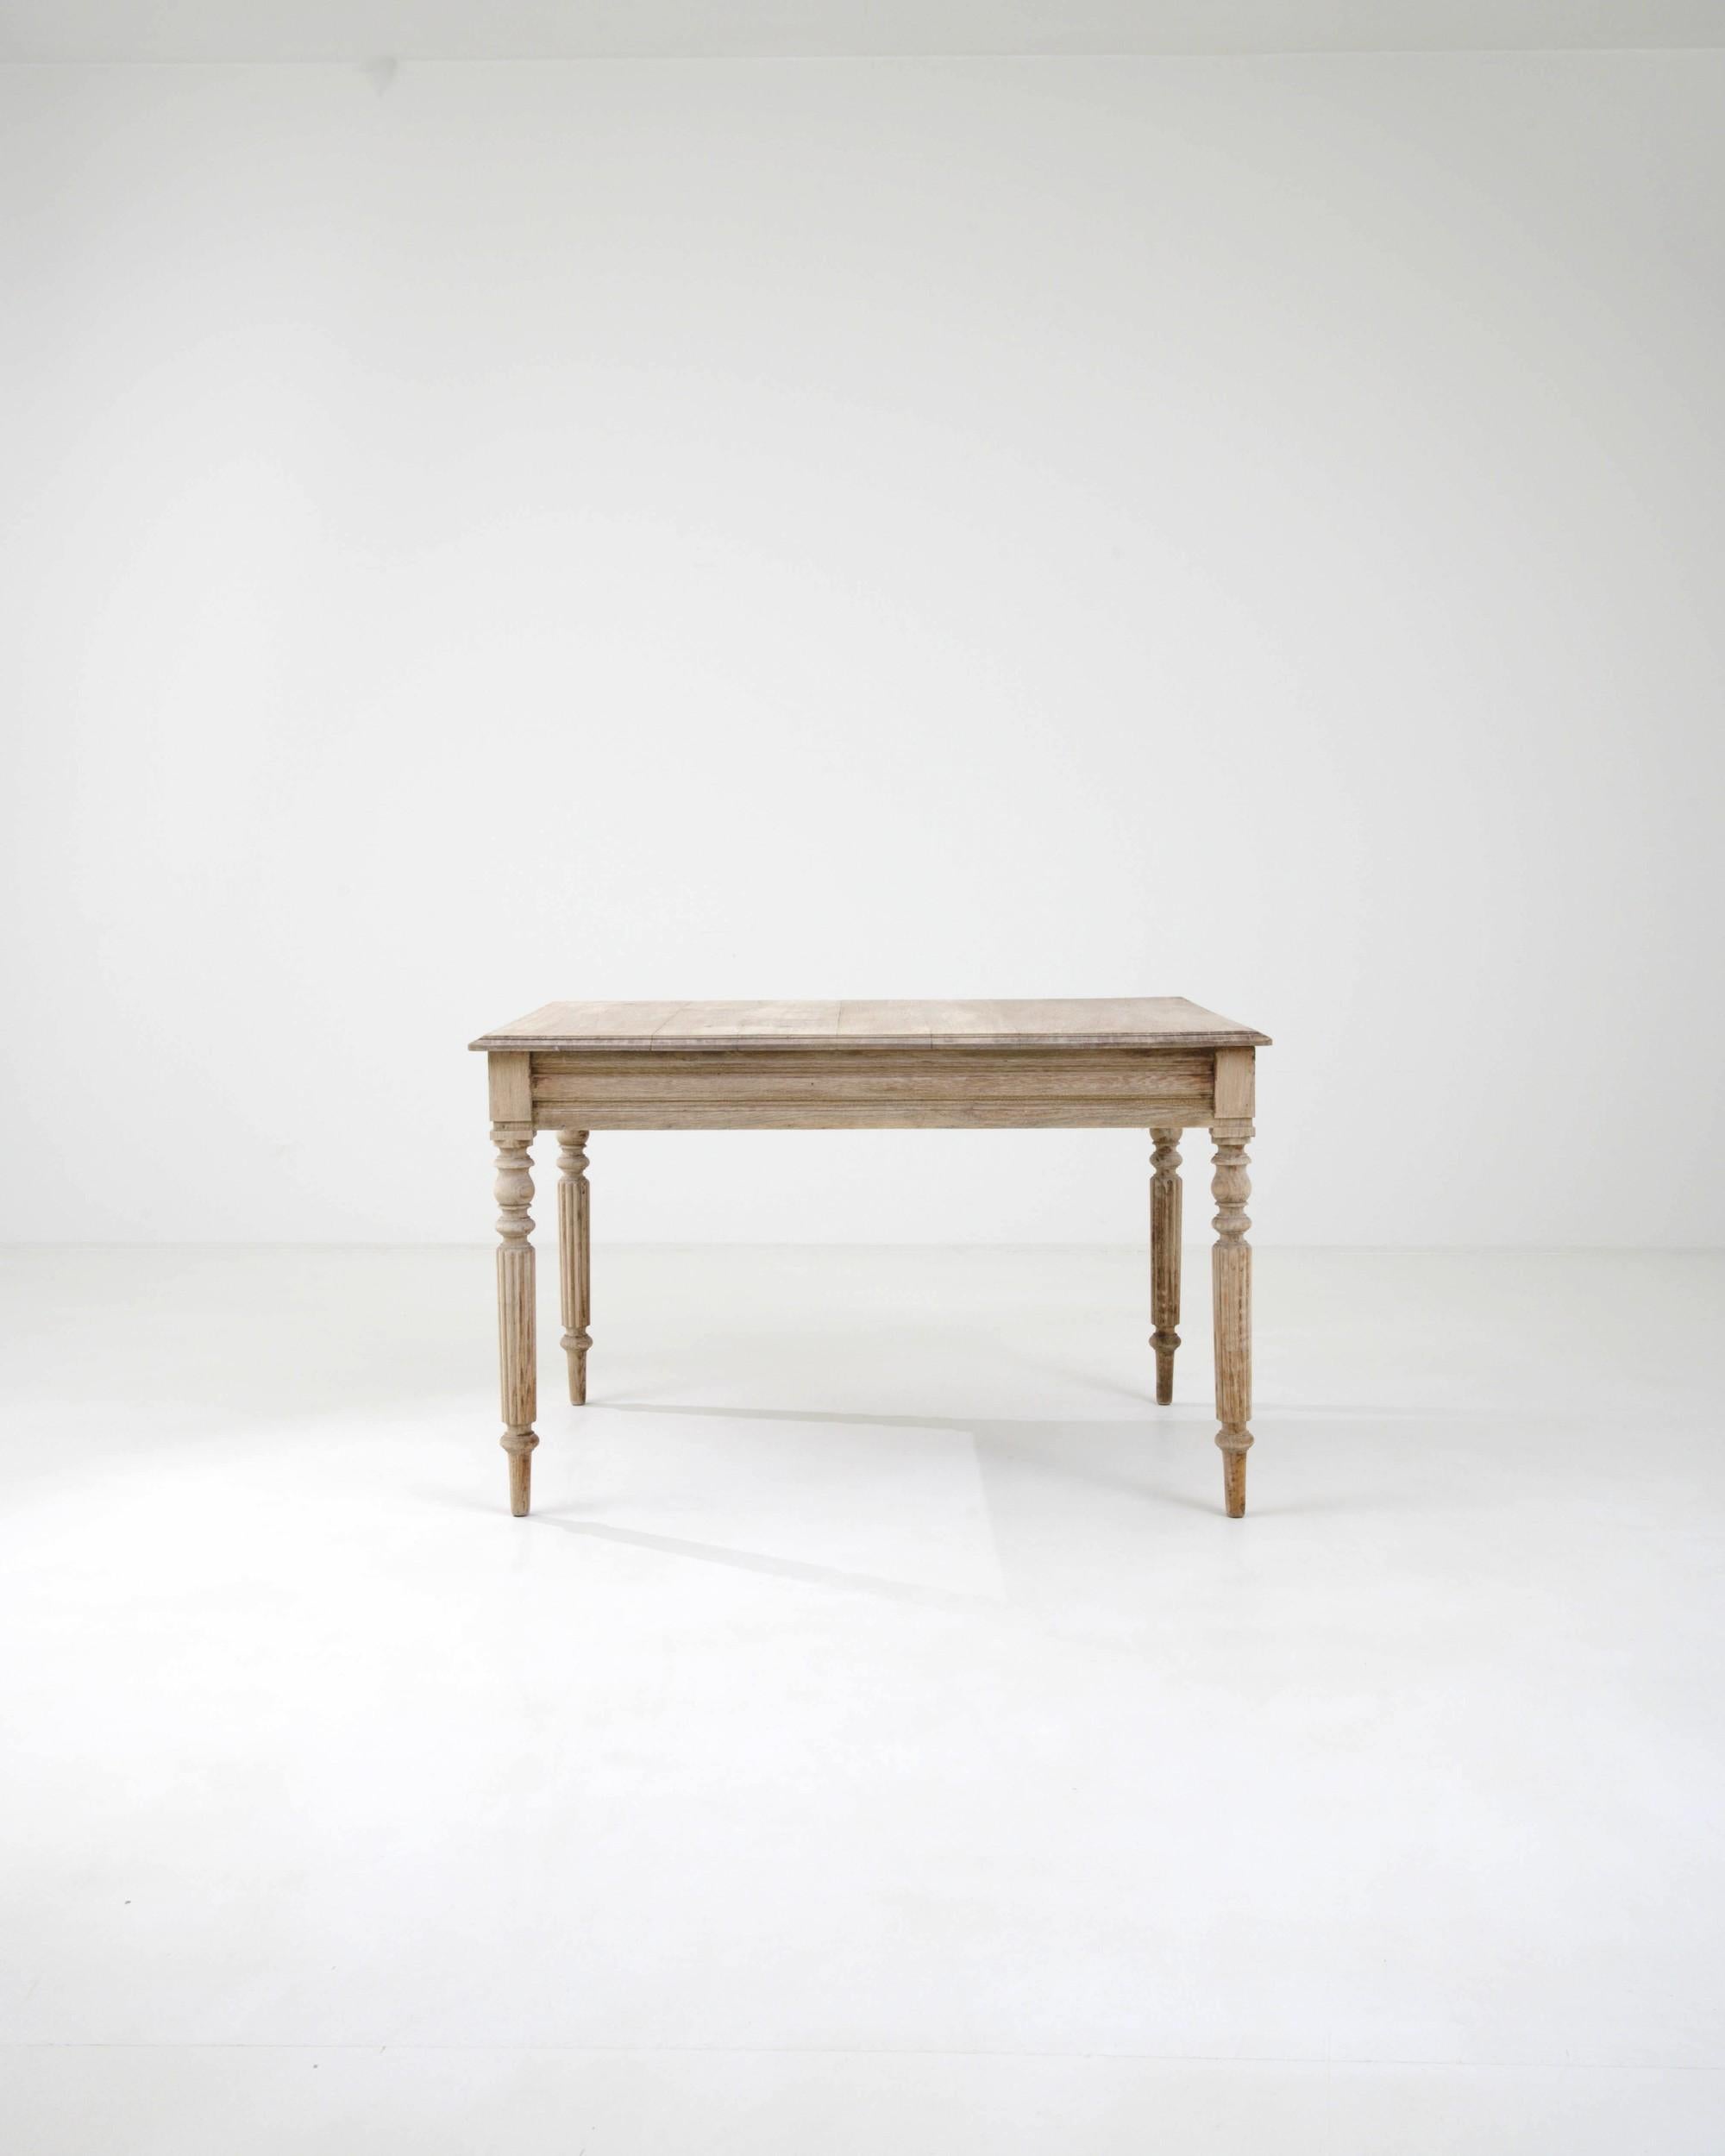 Radiating rustic charm, this antique find effortlessly blends simple and ornate. Made in France circa 1900, this wooden side table is a testament to the craftsmanship of the past. Its subtle carved elements, include a range of simple geometric